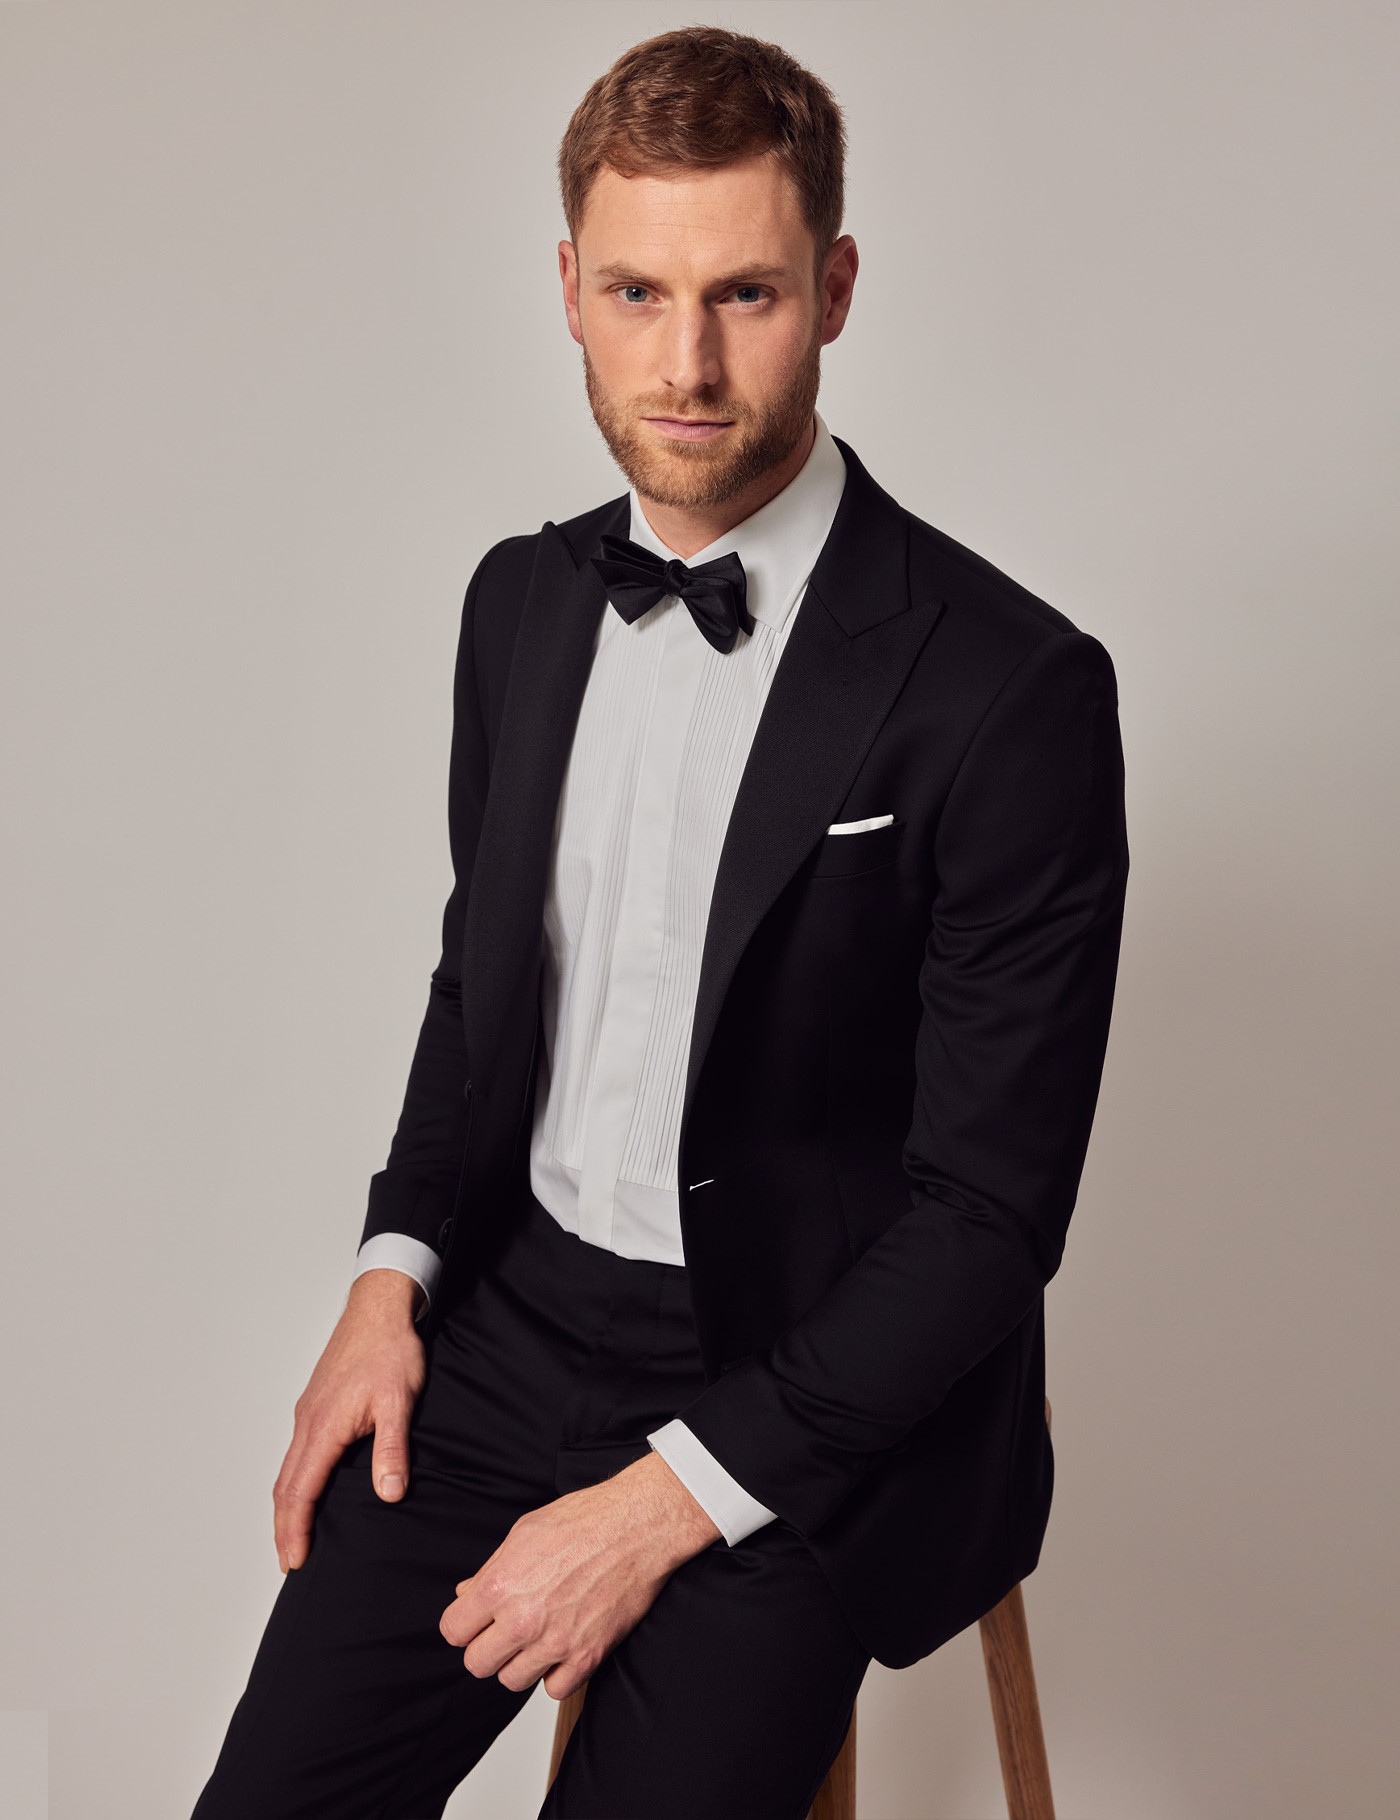 Men's Black Tailored Fit Dinner Suit Jacket - 1913 Collection | Hawes ...